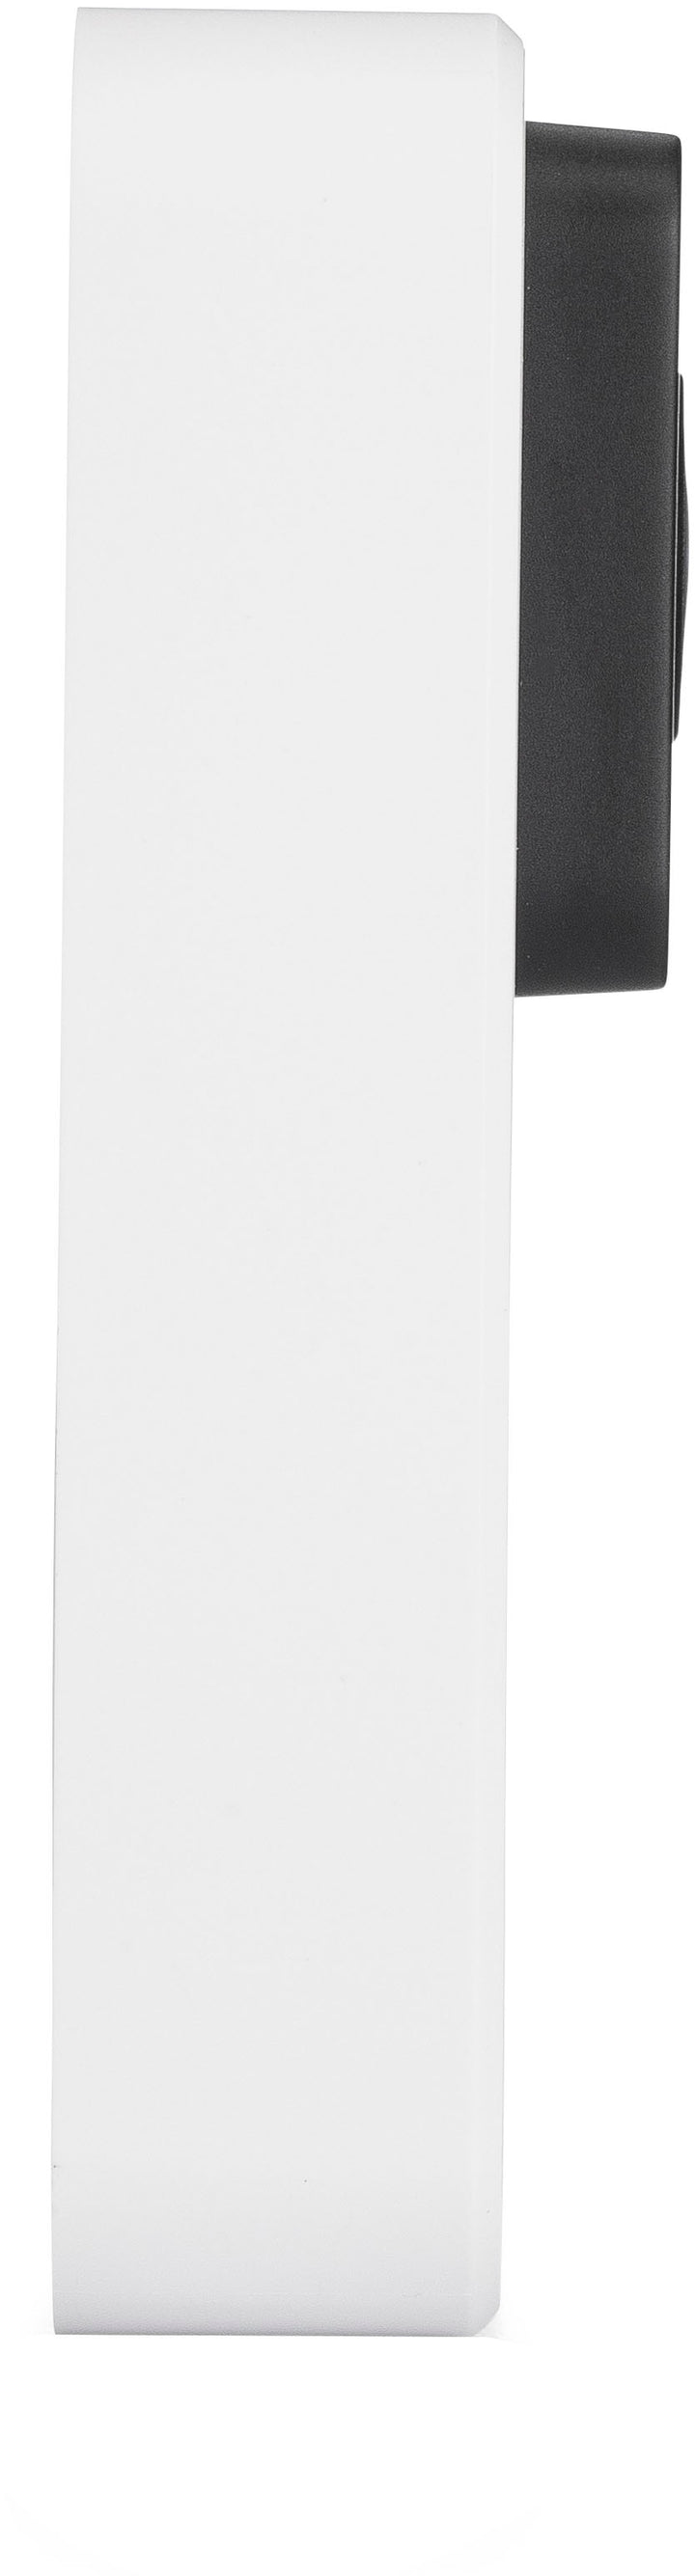 Wyze - Video Doorbell Wired (Horizontal Wedge Included) 1080p HD Video with 2-Way Audio - White_2